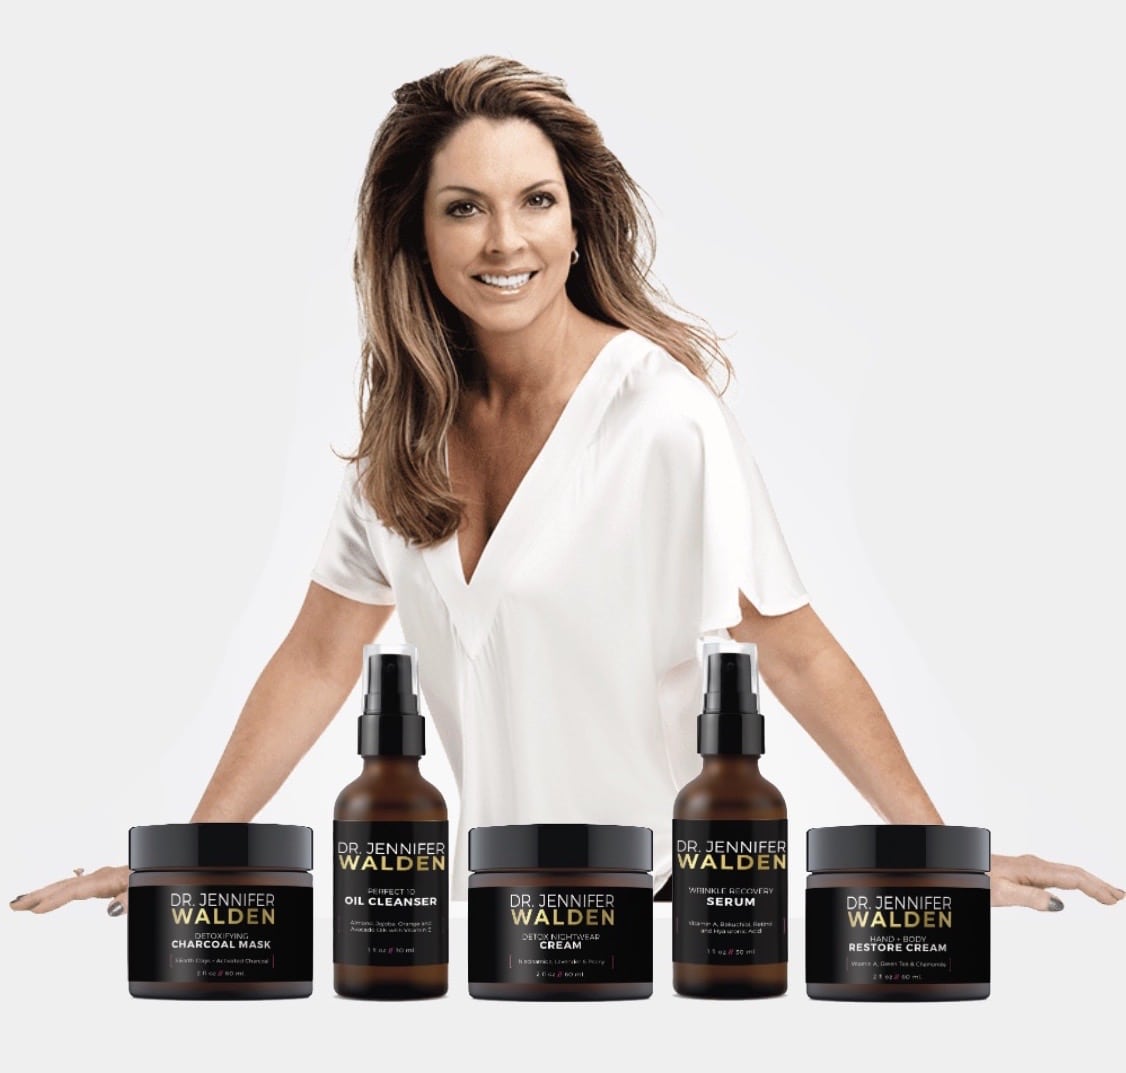 Dr. Jennifer Walden standing behind various acne treatment products